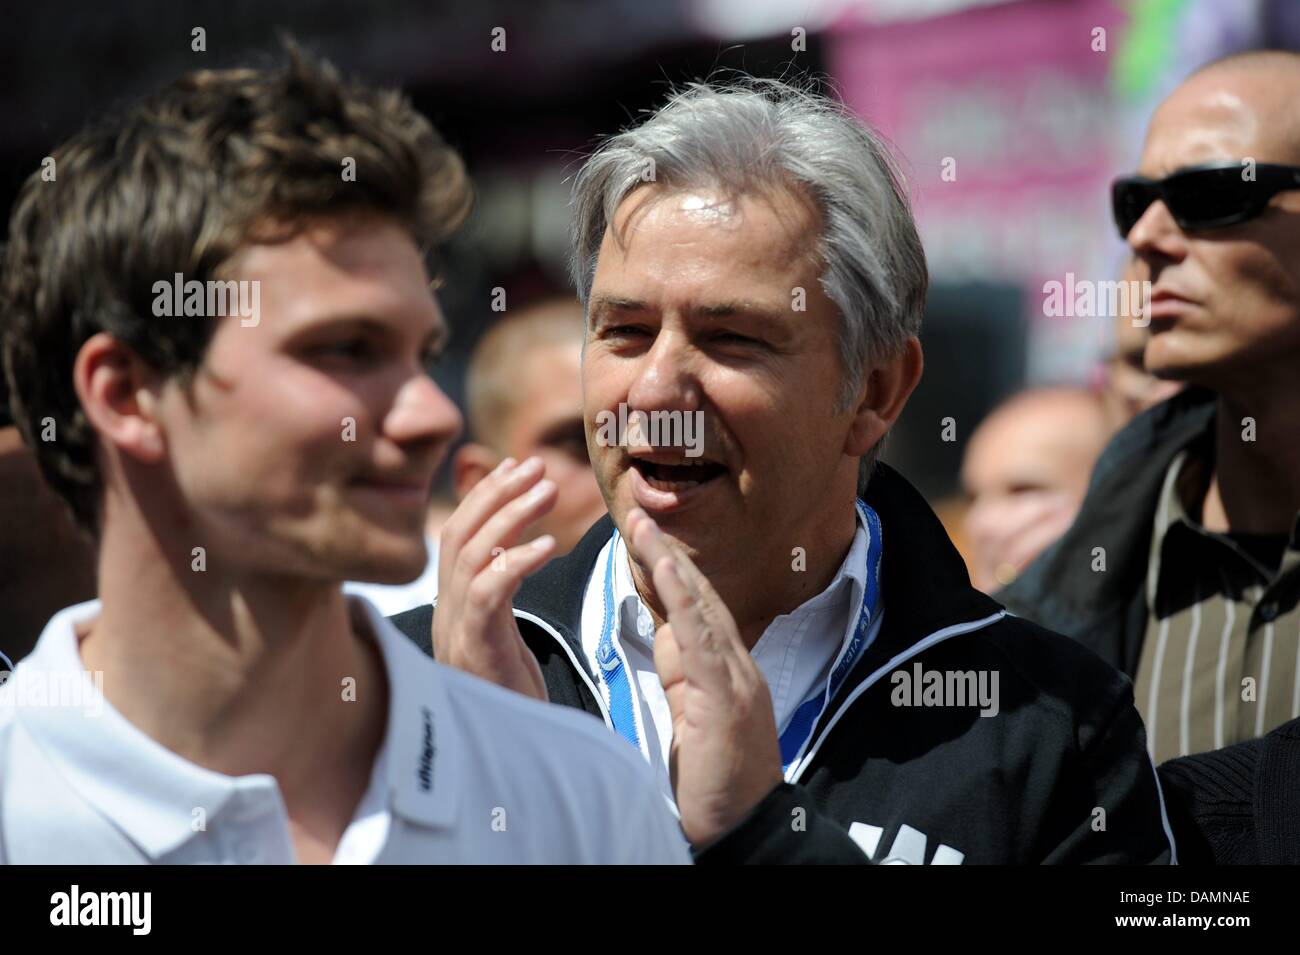 The Governing Mayor of Berlin Klaus Wowereit (M) attends the Christopher Street Day (CSD) parade in Berlin, Germany, 25 June 2011. Each year at the CSD, homosexual men and women remember the police's brutal attack on homosexuals in New York in 1969. Photo: Maurizio Gambarini Stock Photo